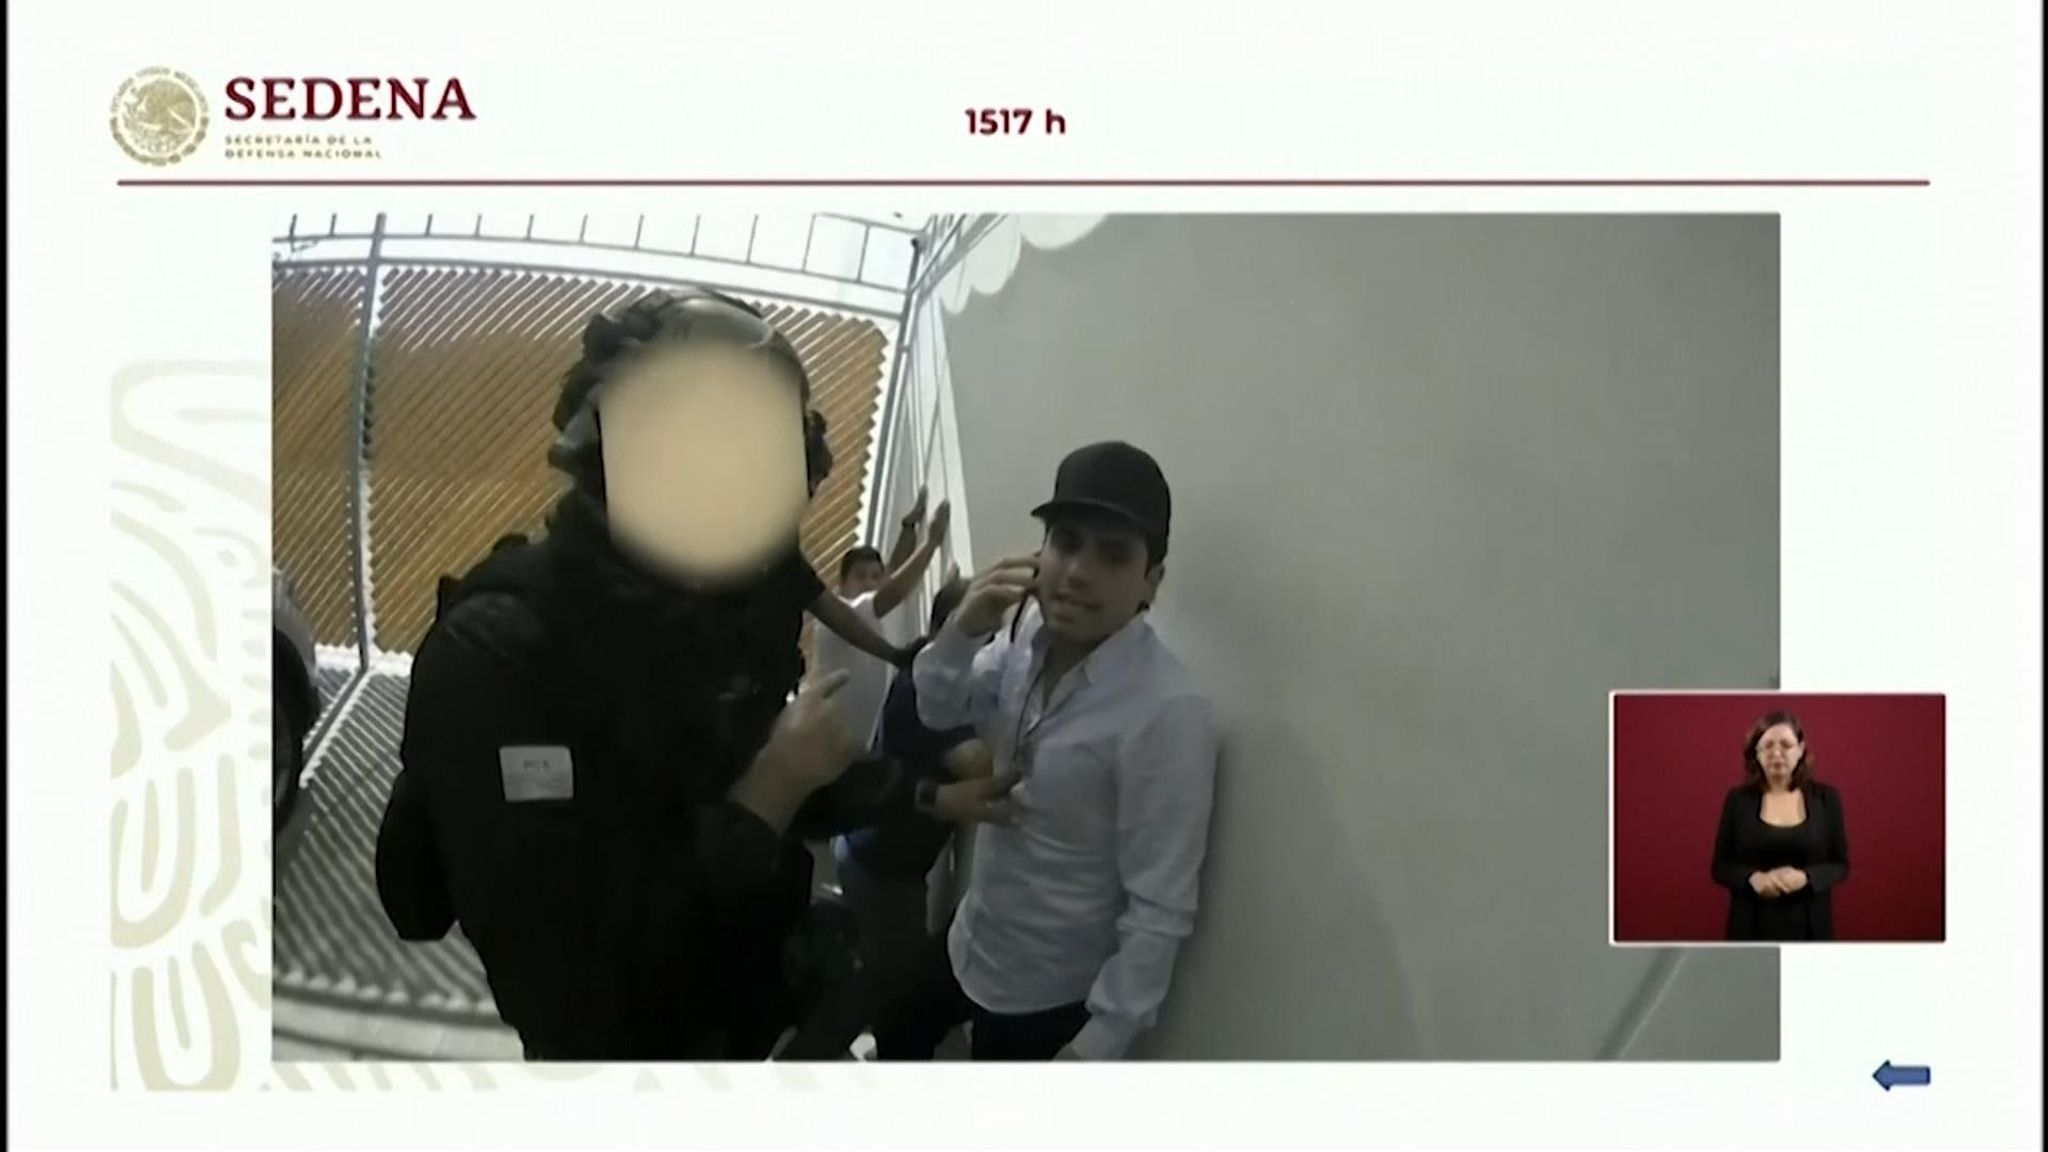 El Chapo son's brief arrest captured in dramatic footage before his